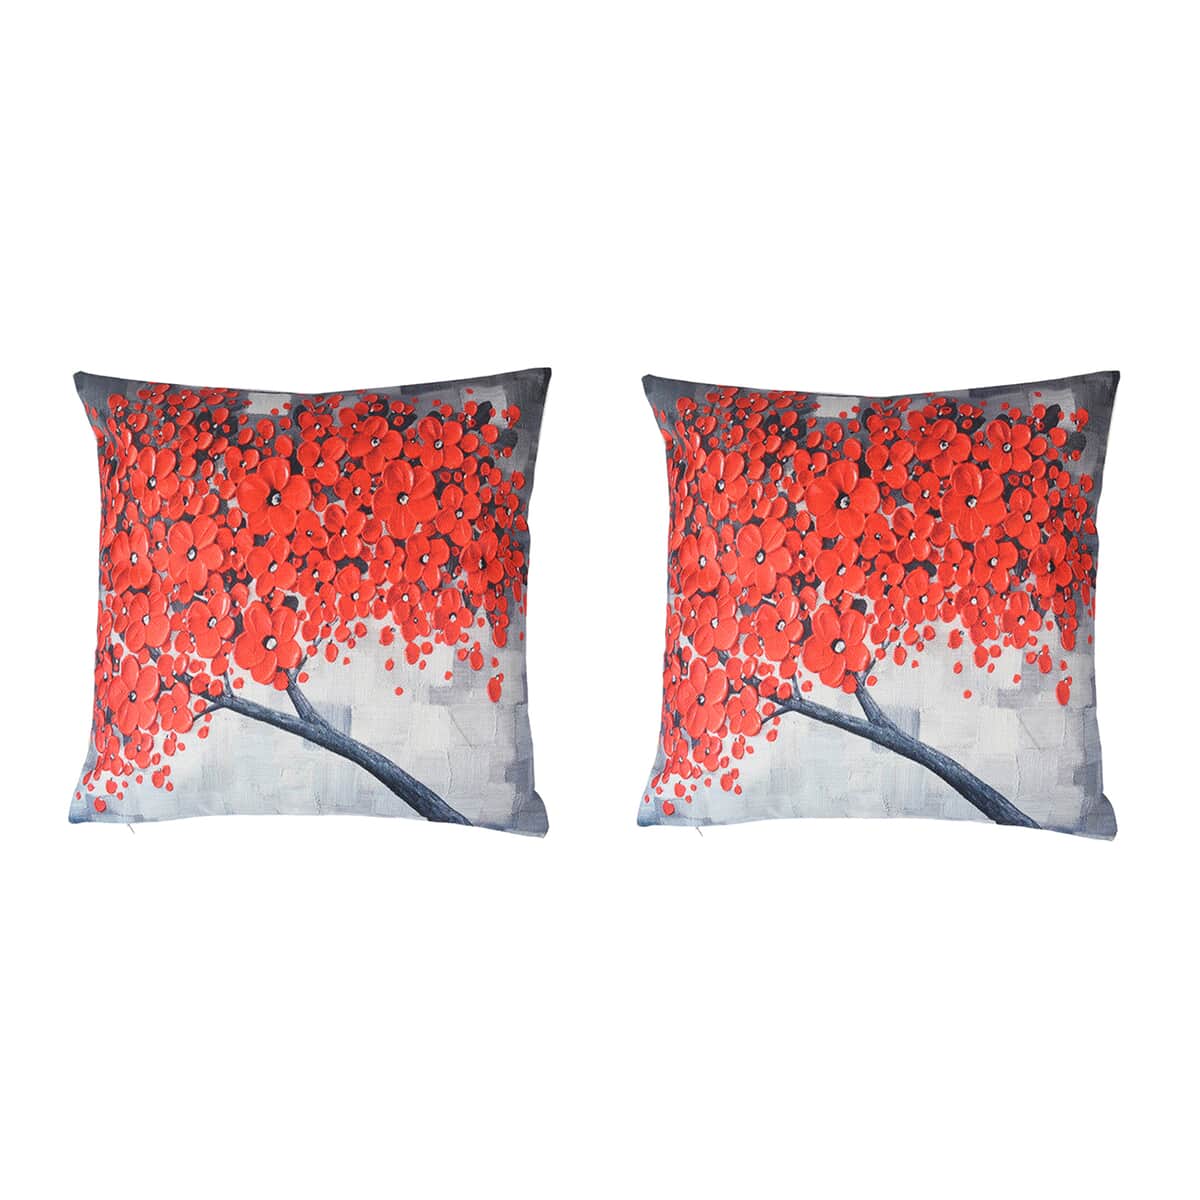 Homesmart Gray & Orange Floral Tree Pattern 100% Polyester Cushion Cover Set of 2, Wrinkle Resistant Ultra Soft Cushion Cover Set with Zipper Closure image number 0